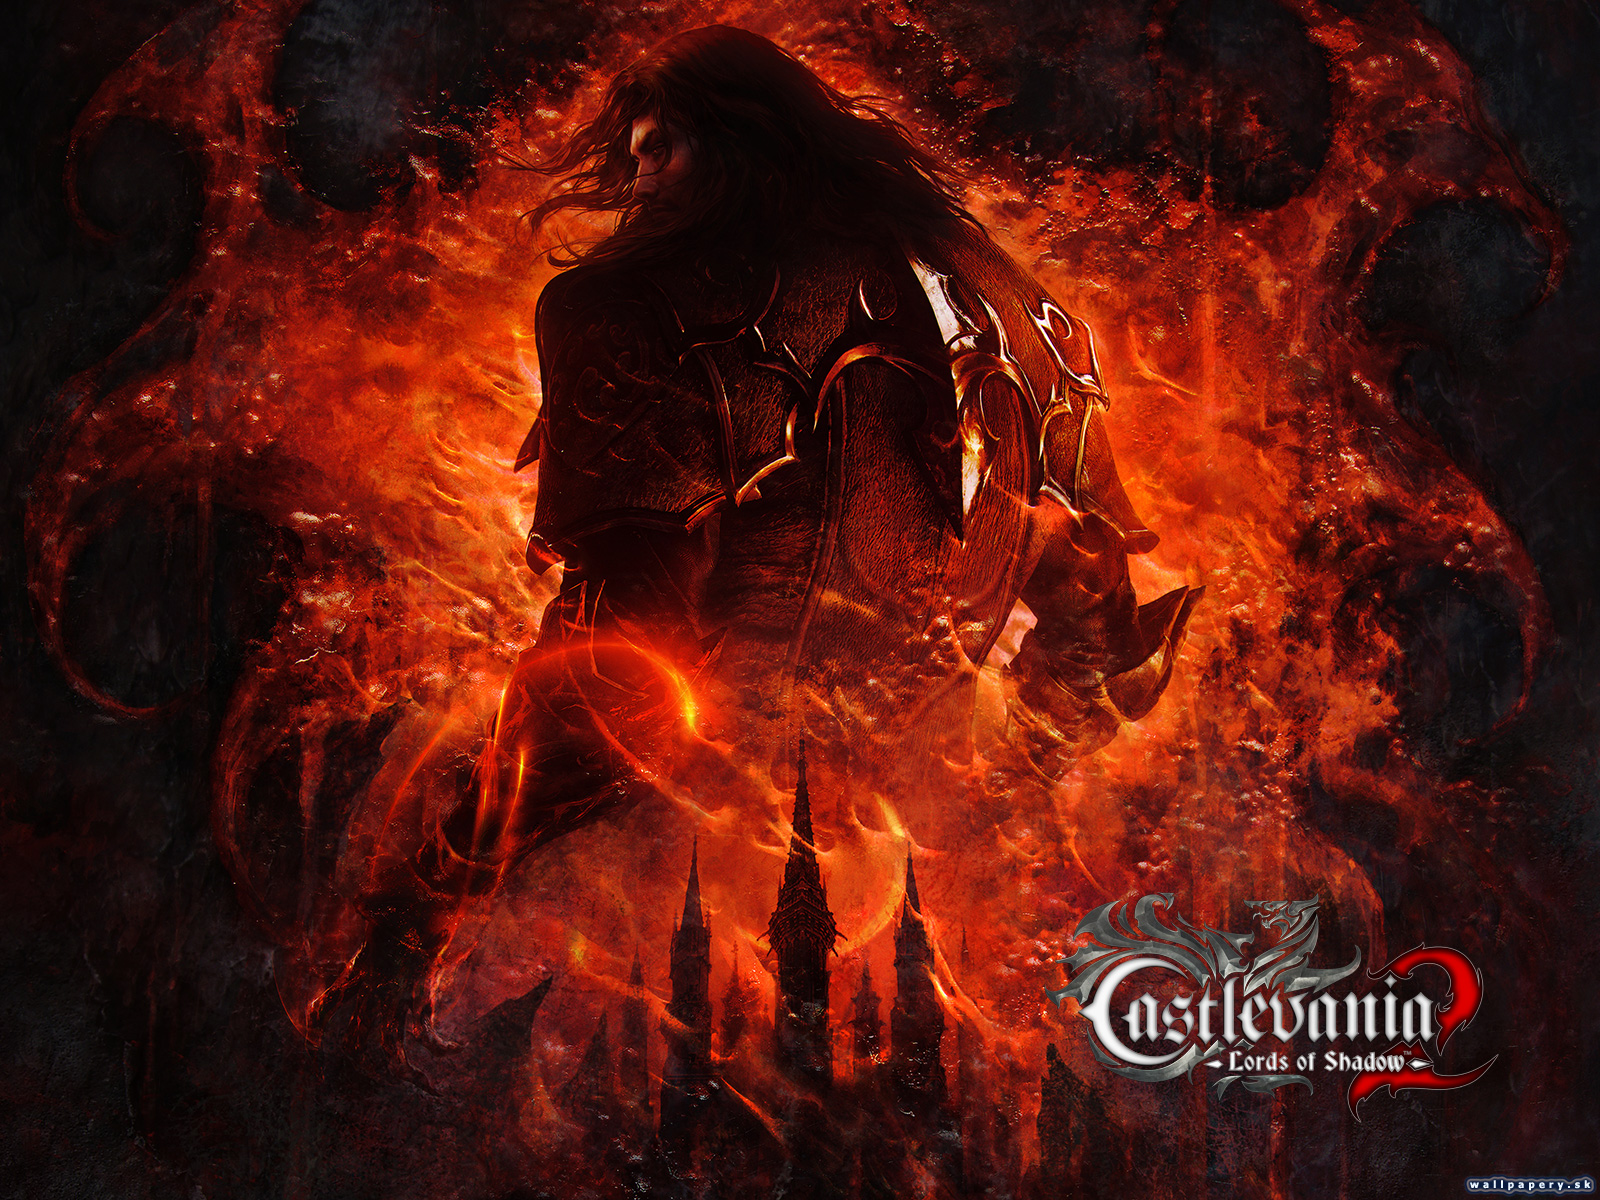 Castlevania: Lords of Shadow 2 - wallpaper 9